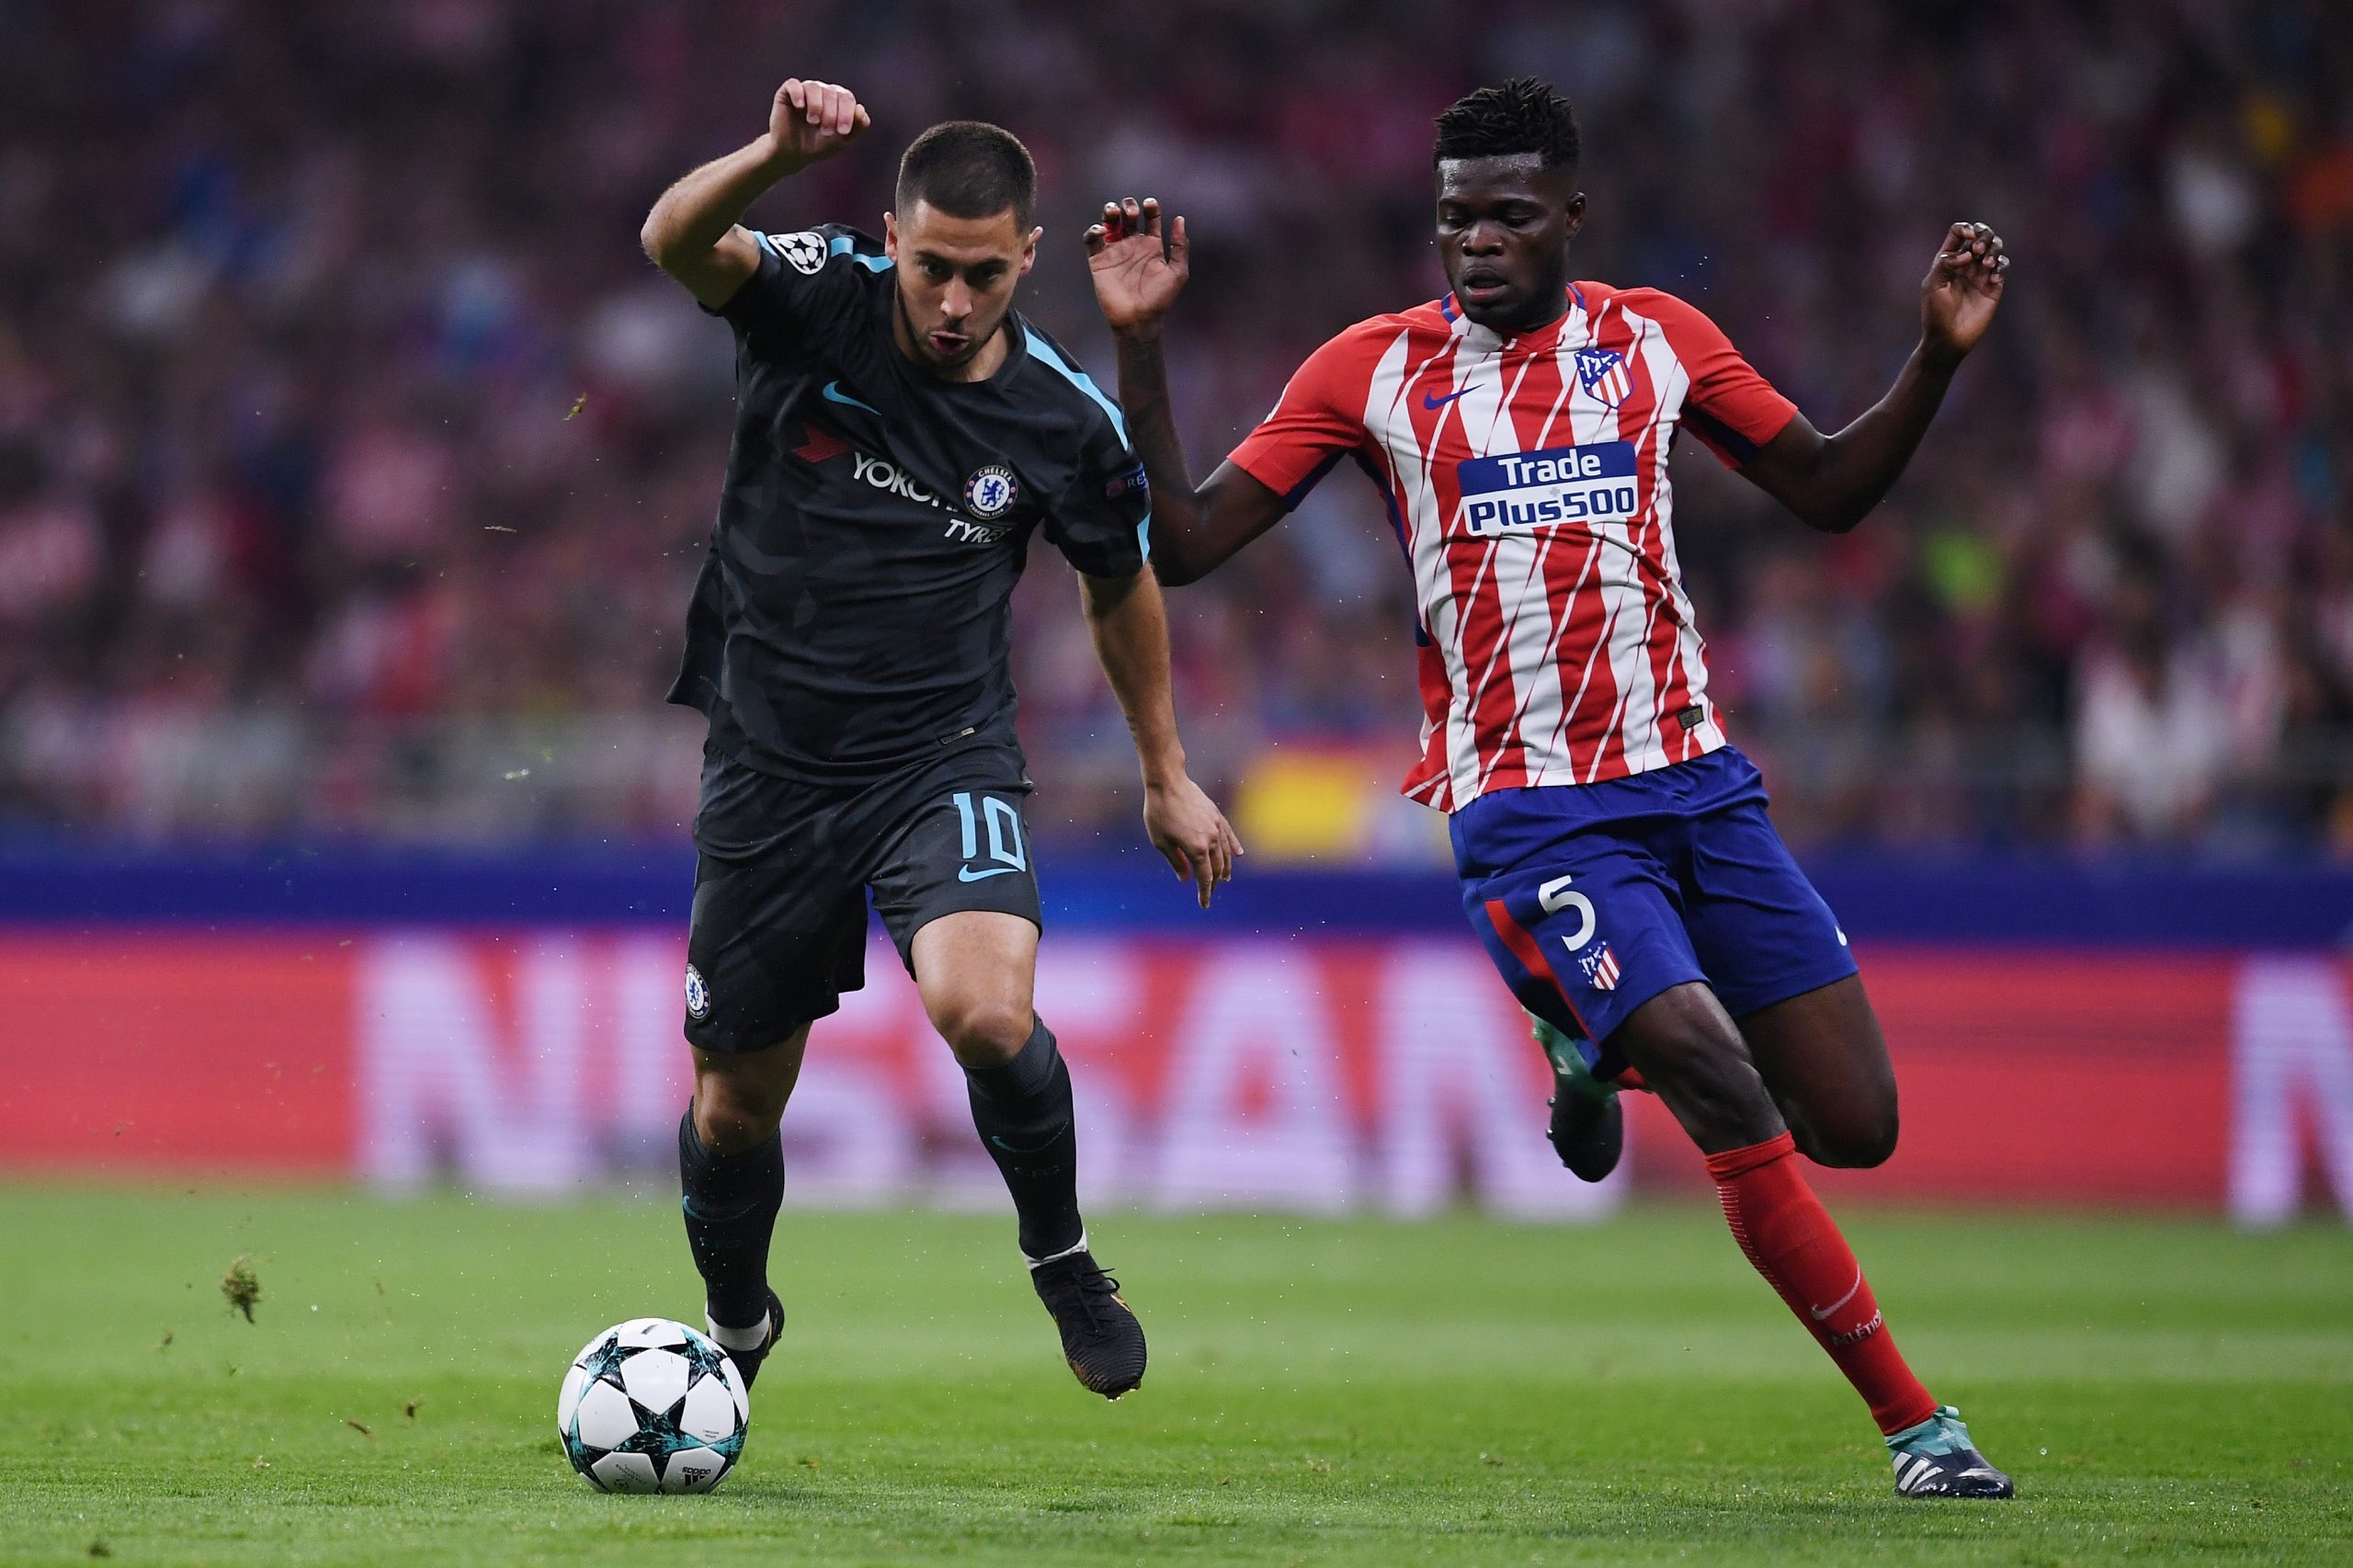 Chelsea lost out on Thomas Partey to Arsenal in the summer transfer window. (GETTY Images)